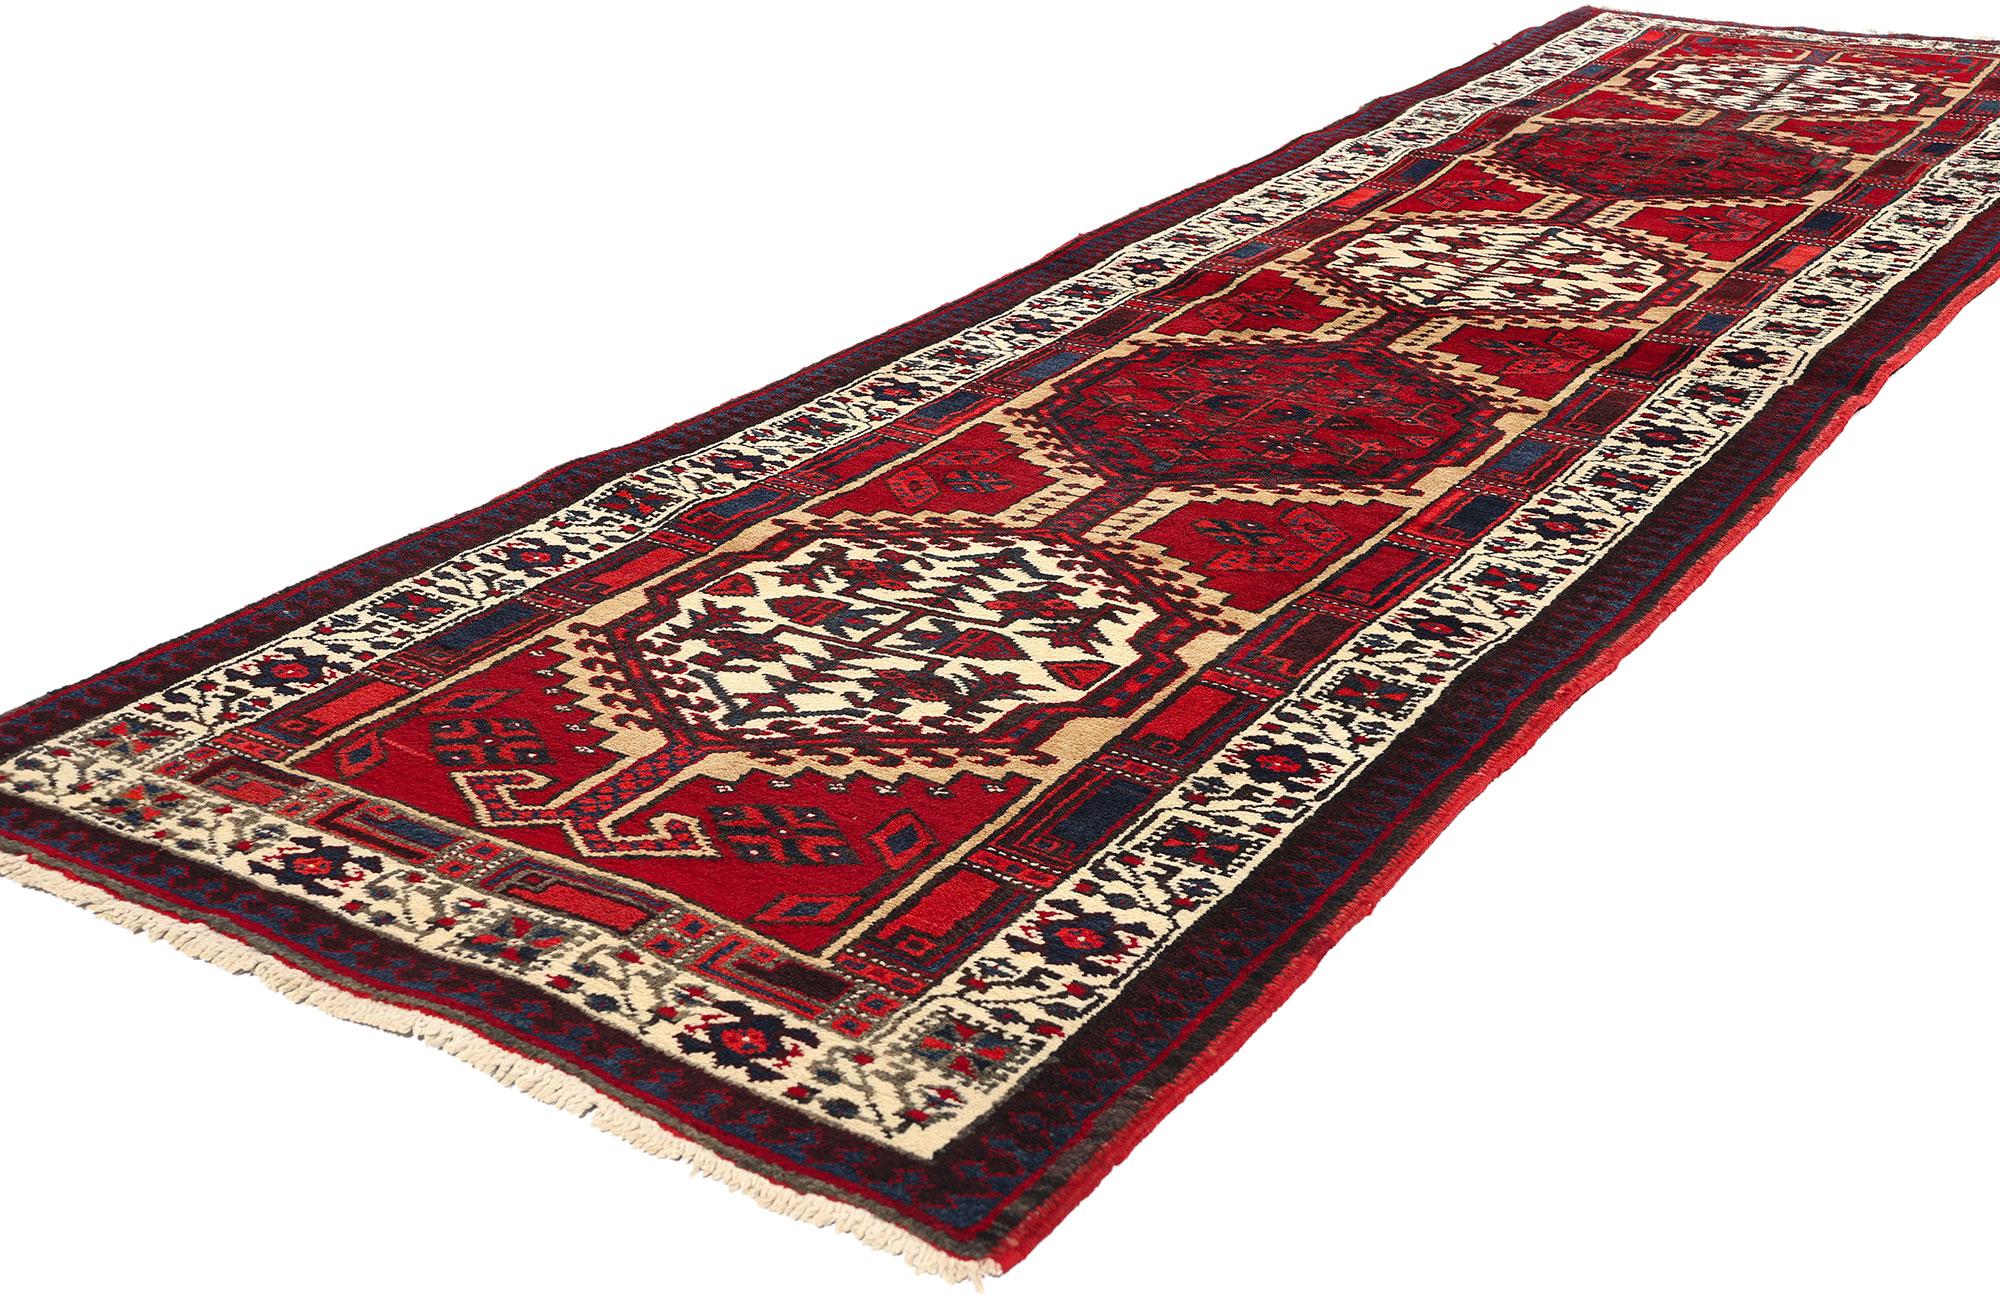 60245 Vintage Persian Heriz Rug Runner, 03'02 x 11'03. Persian Heriz carpet runners represent a specialized category within the realm of Heriz rugs, fashioned in a long and narrow format tailored specifically for embellishing hallways, staircases,